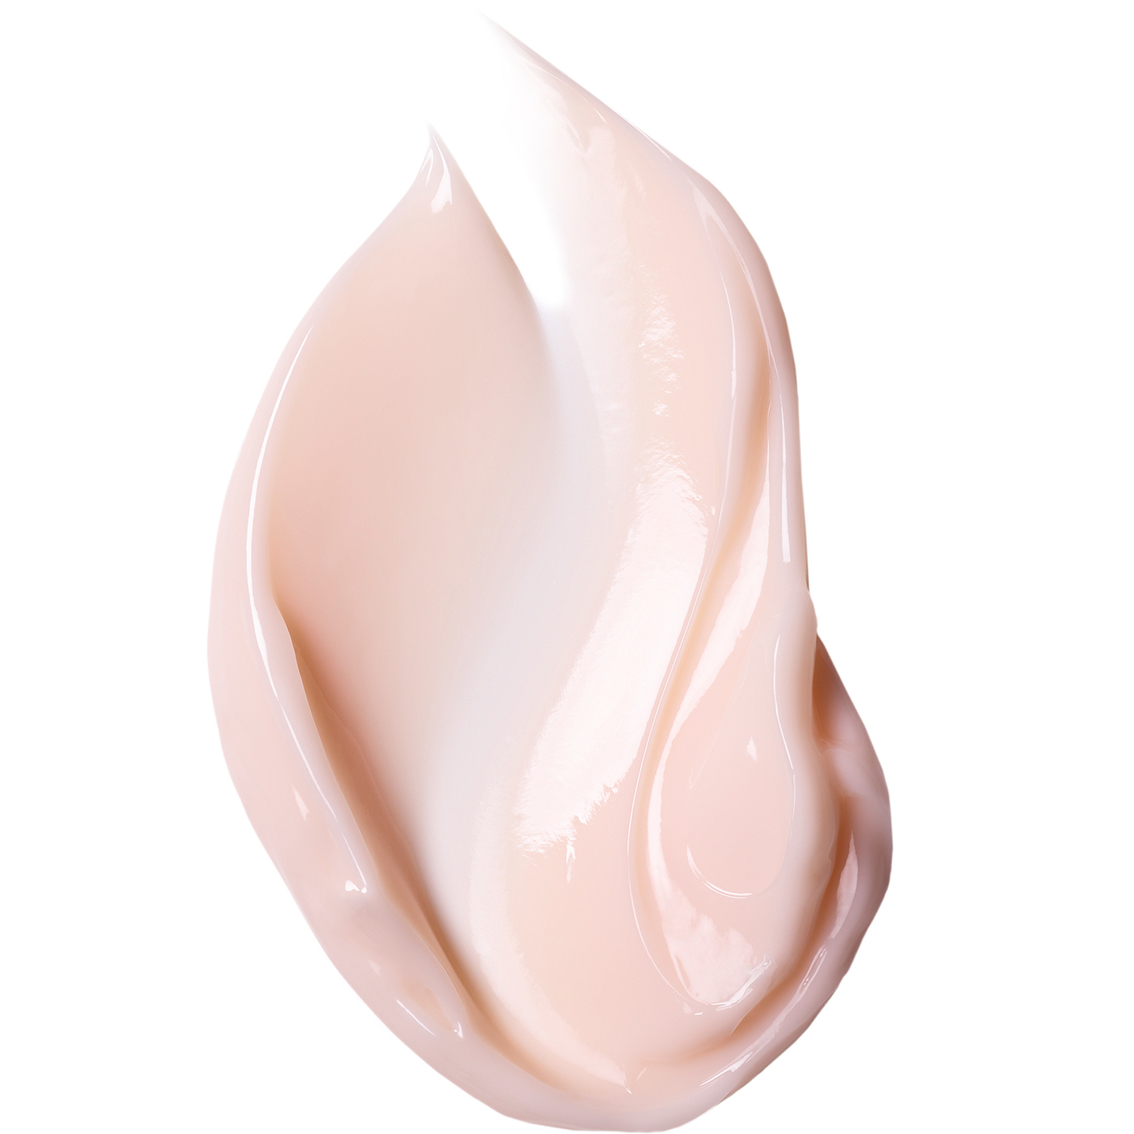 Shiseido Vital Perfection Uplifting and Firming Cream - Image 3 of 3